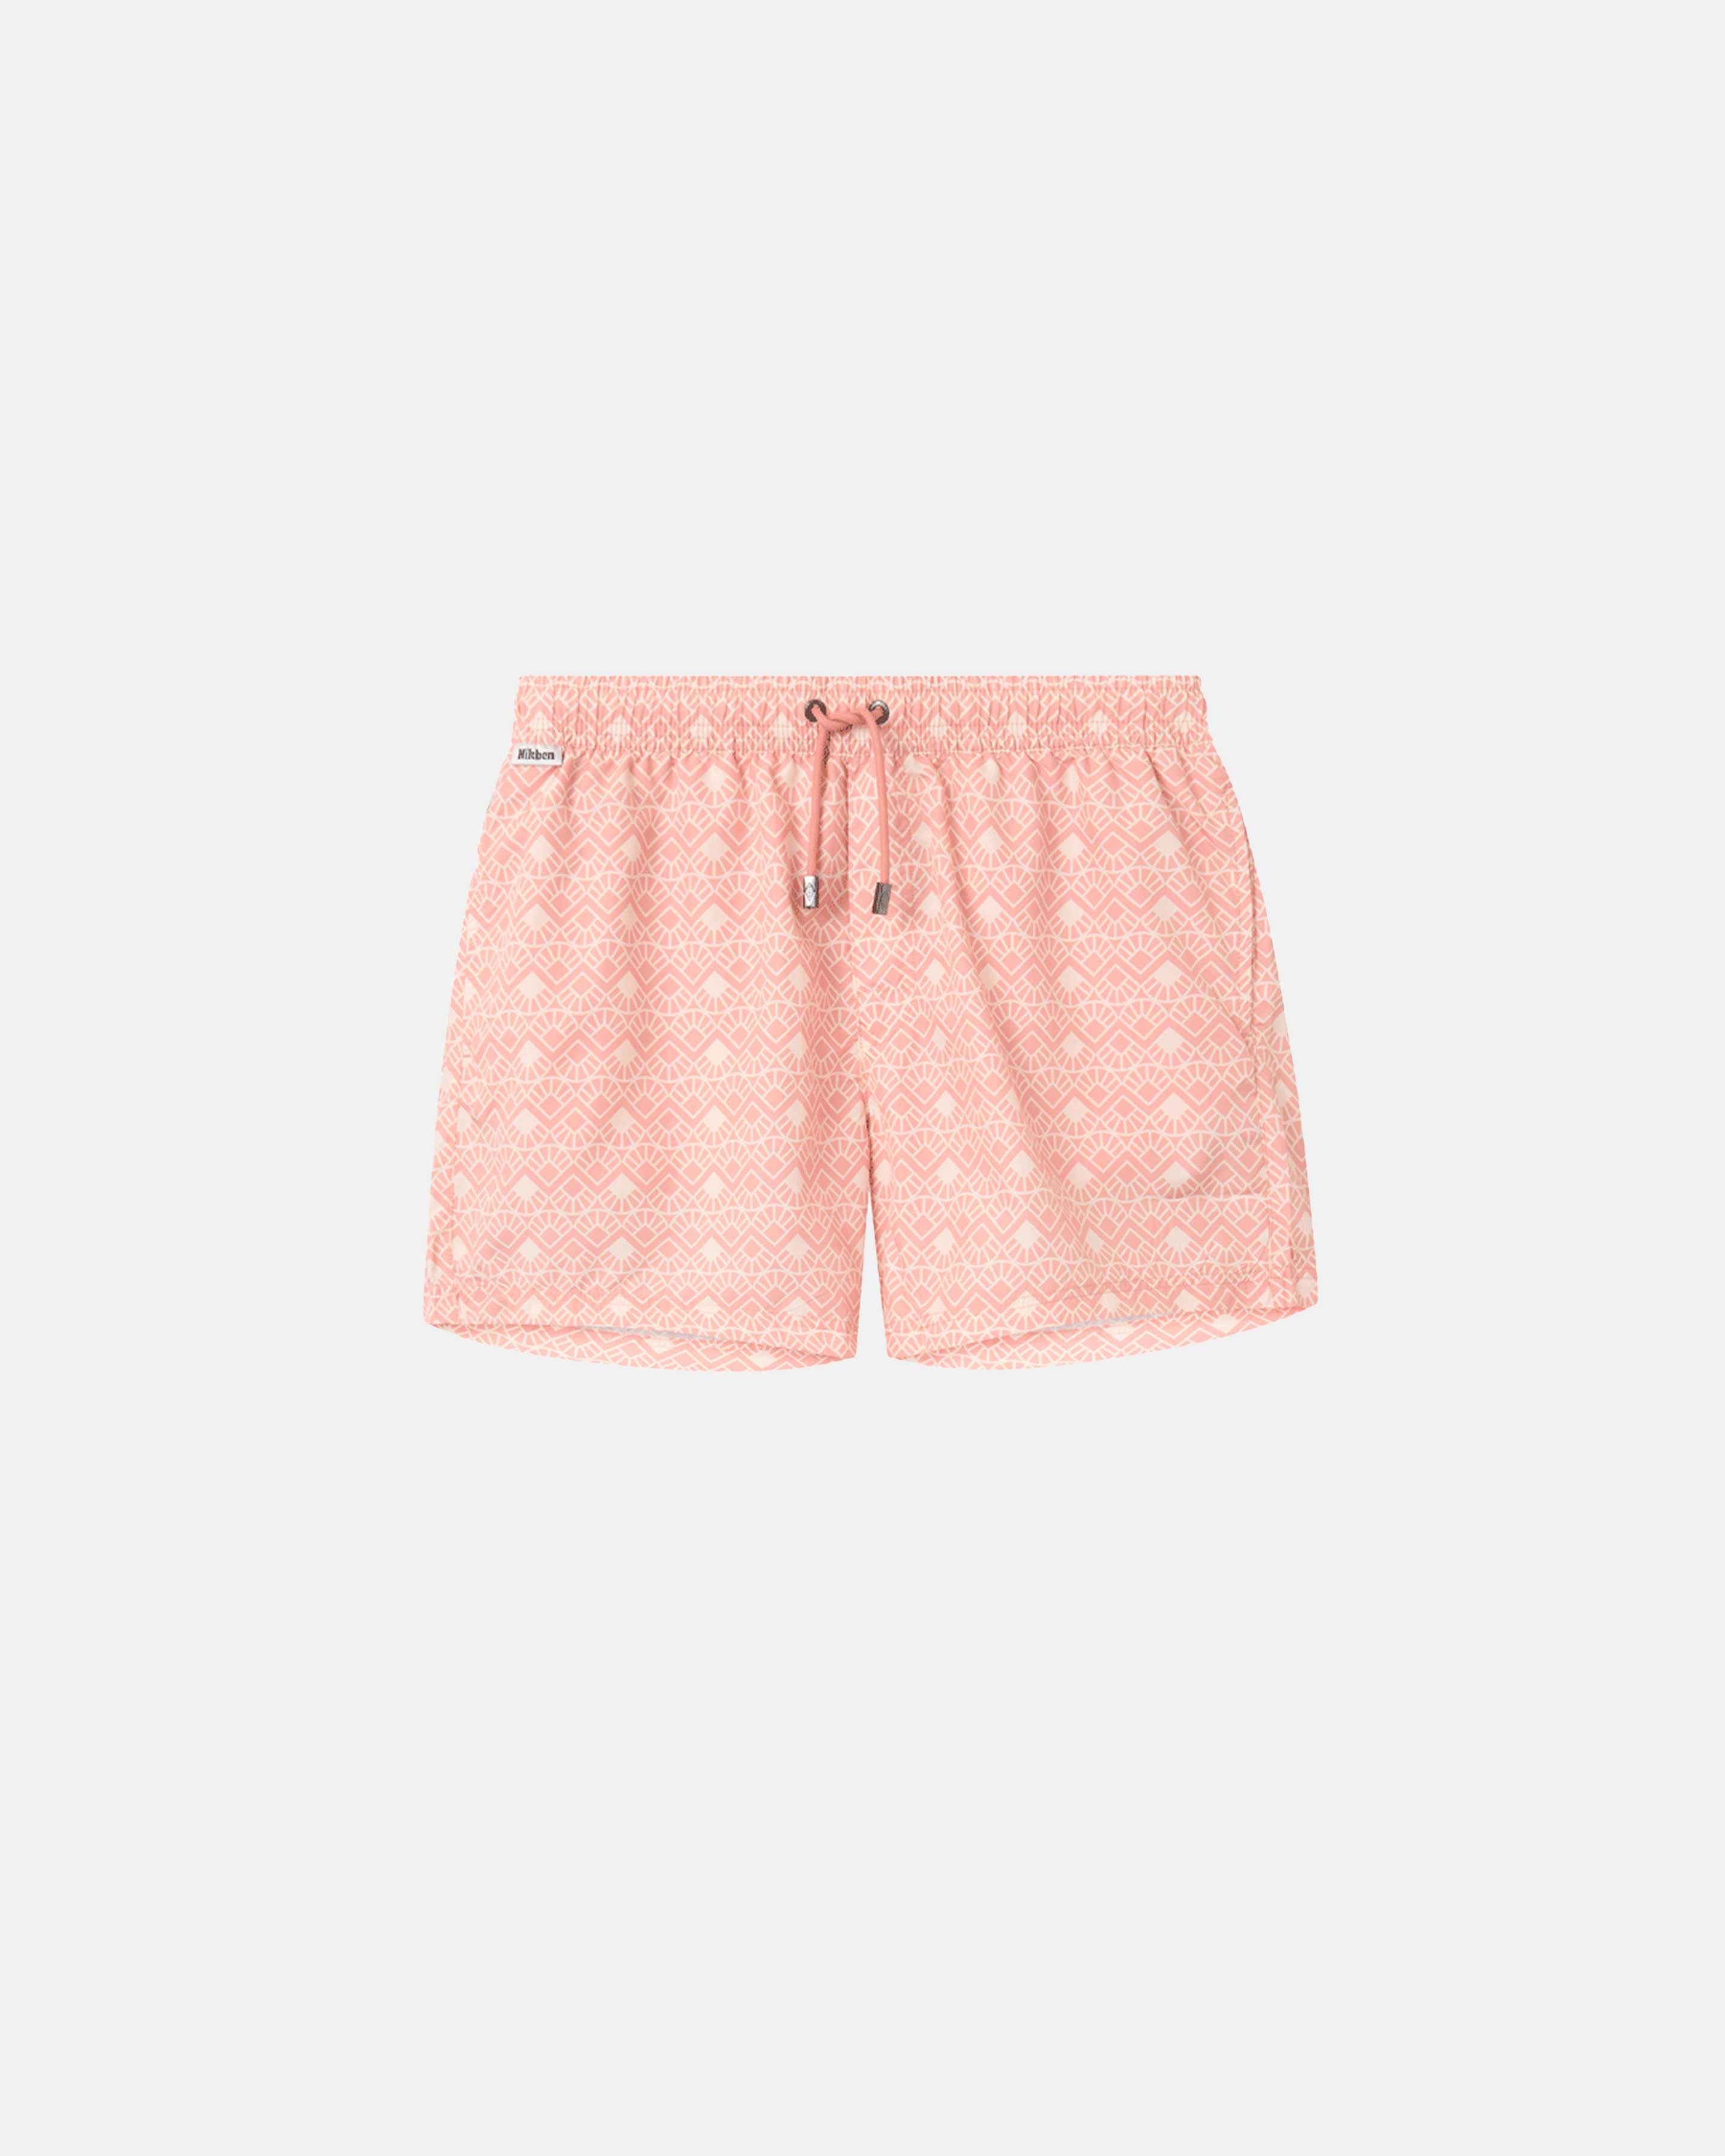 Light pink patterned swim trunks. Mid length shorts with drawstring waistband and two side pockets.